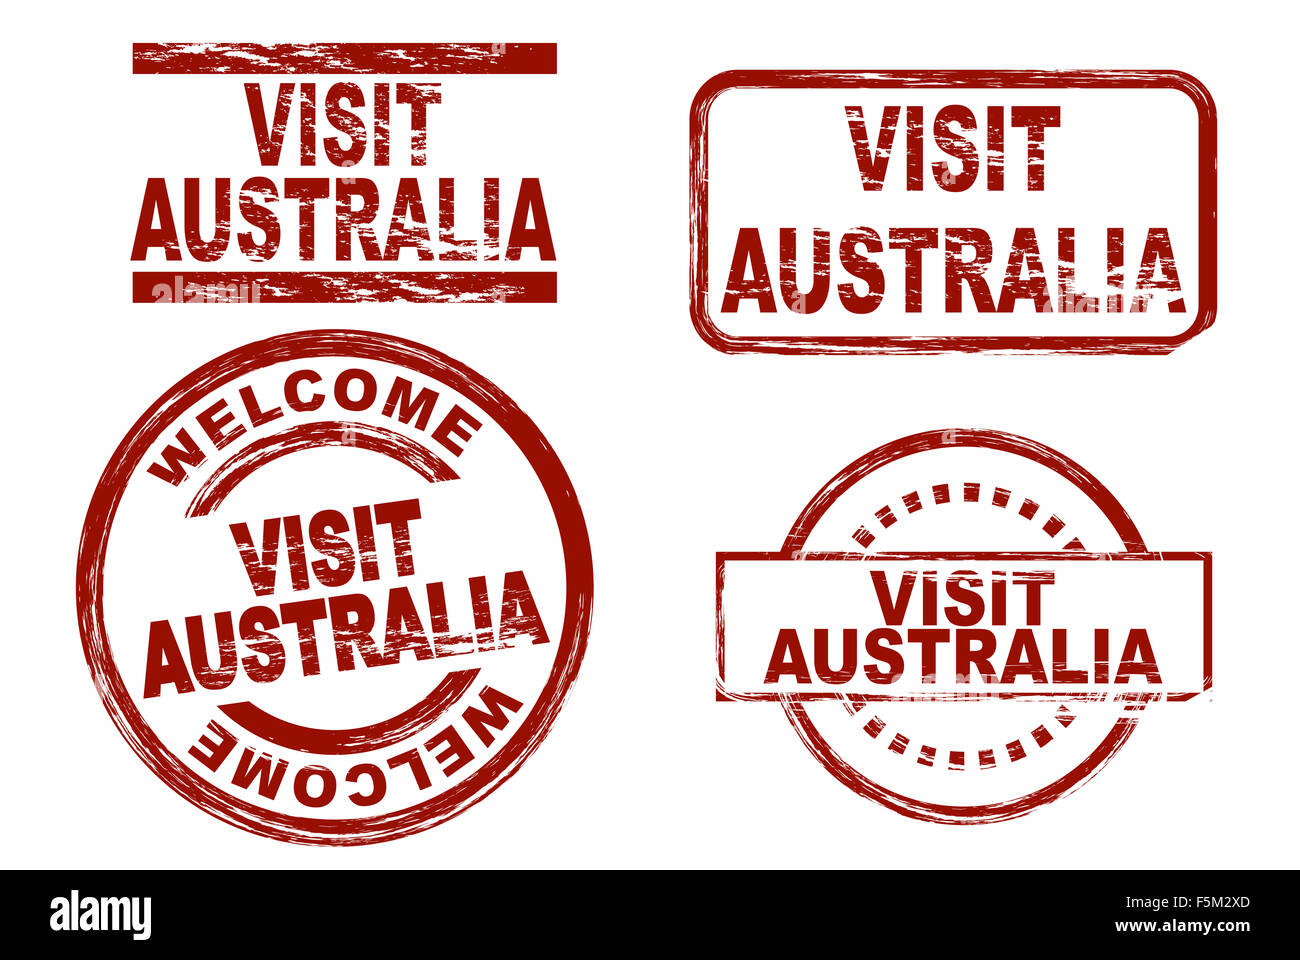 Set of stylized ink stamps showing the term visit australia. All on white background. Stock Photo